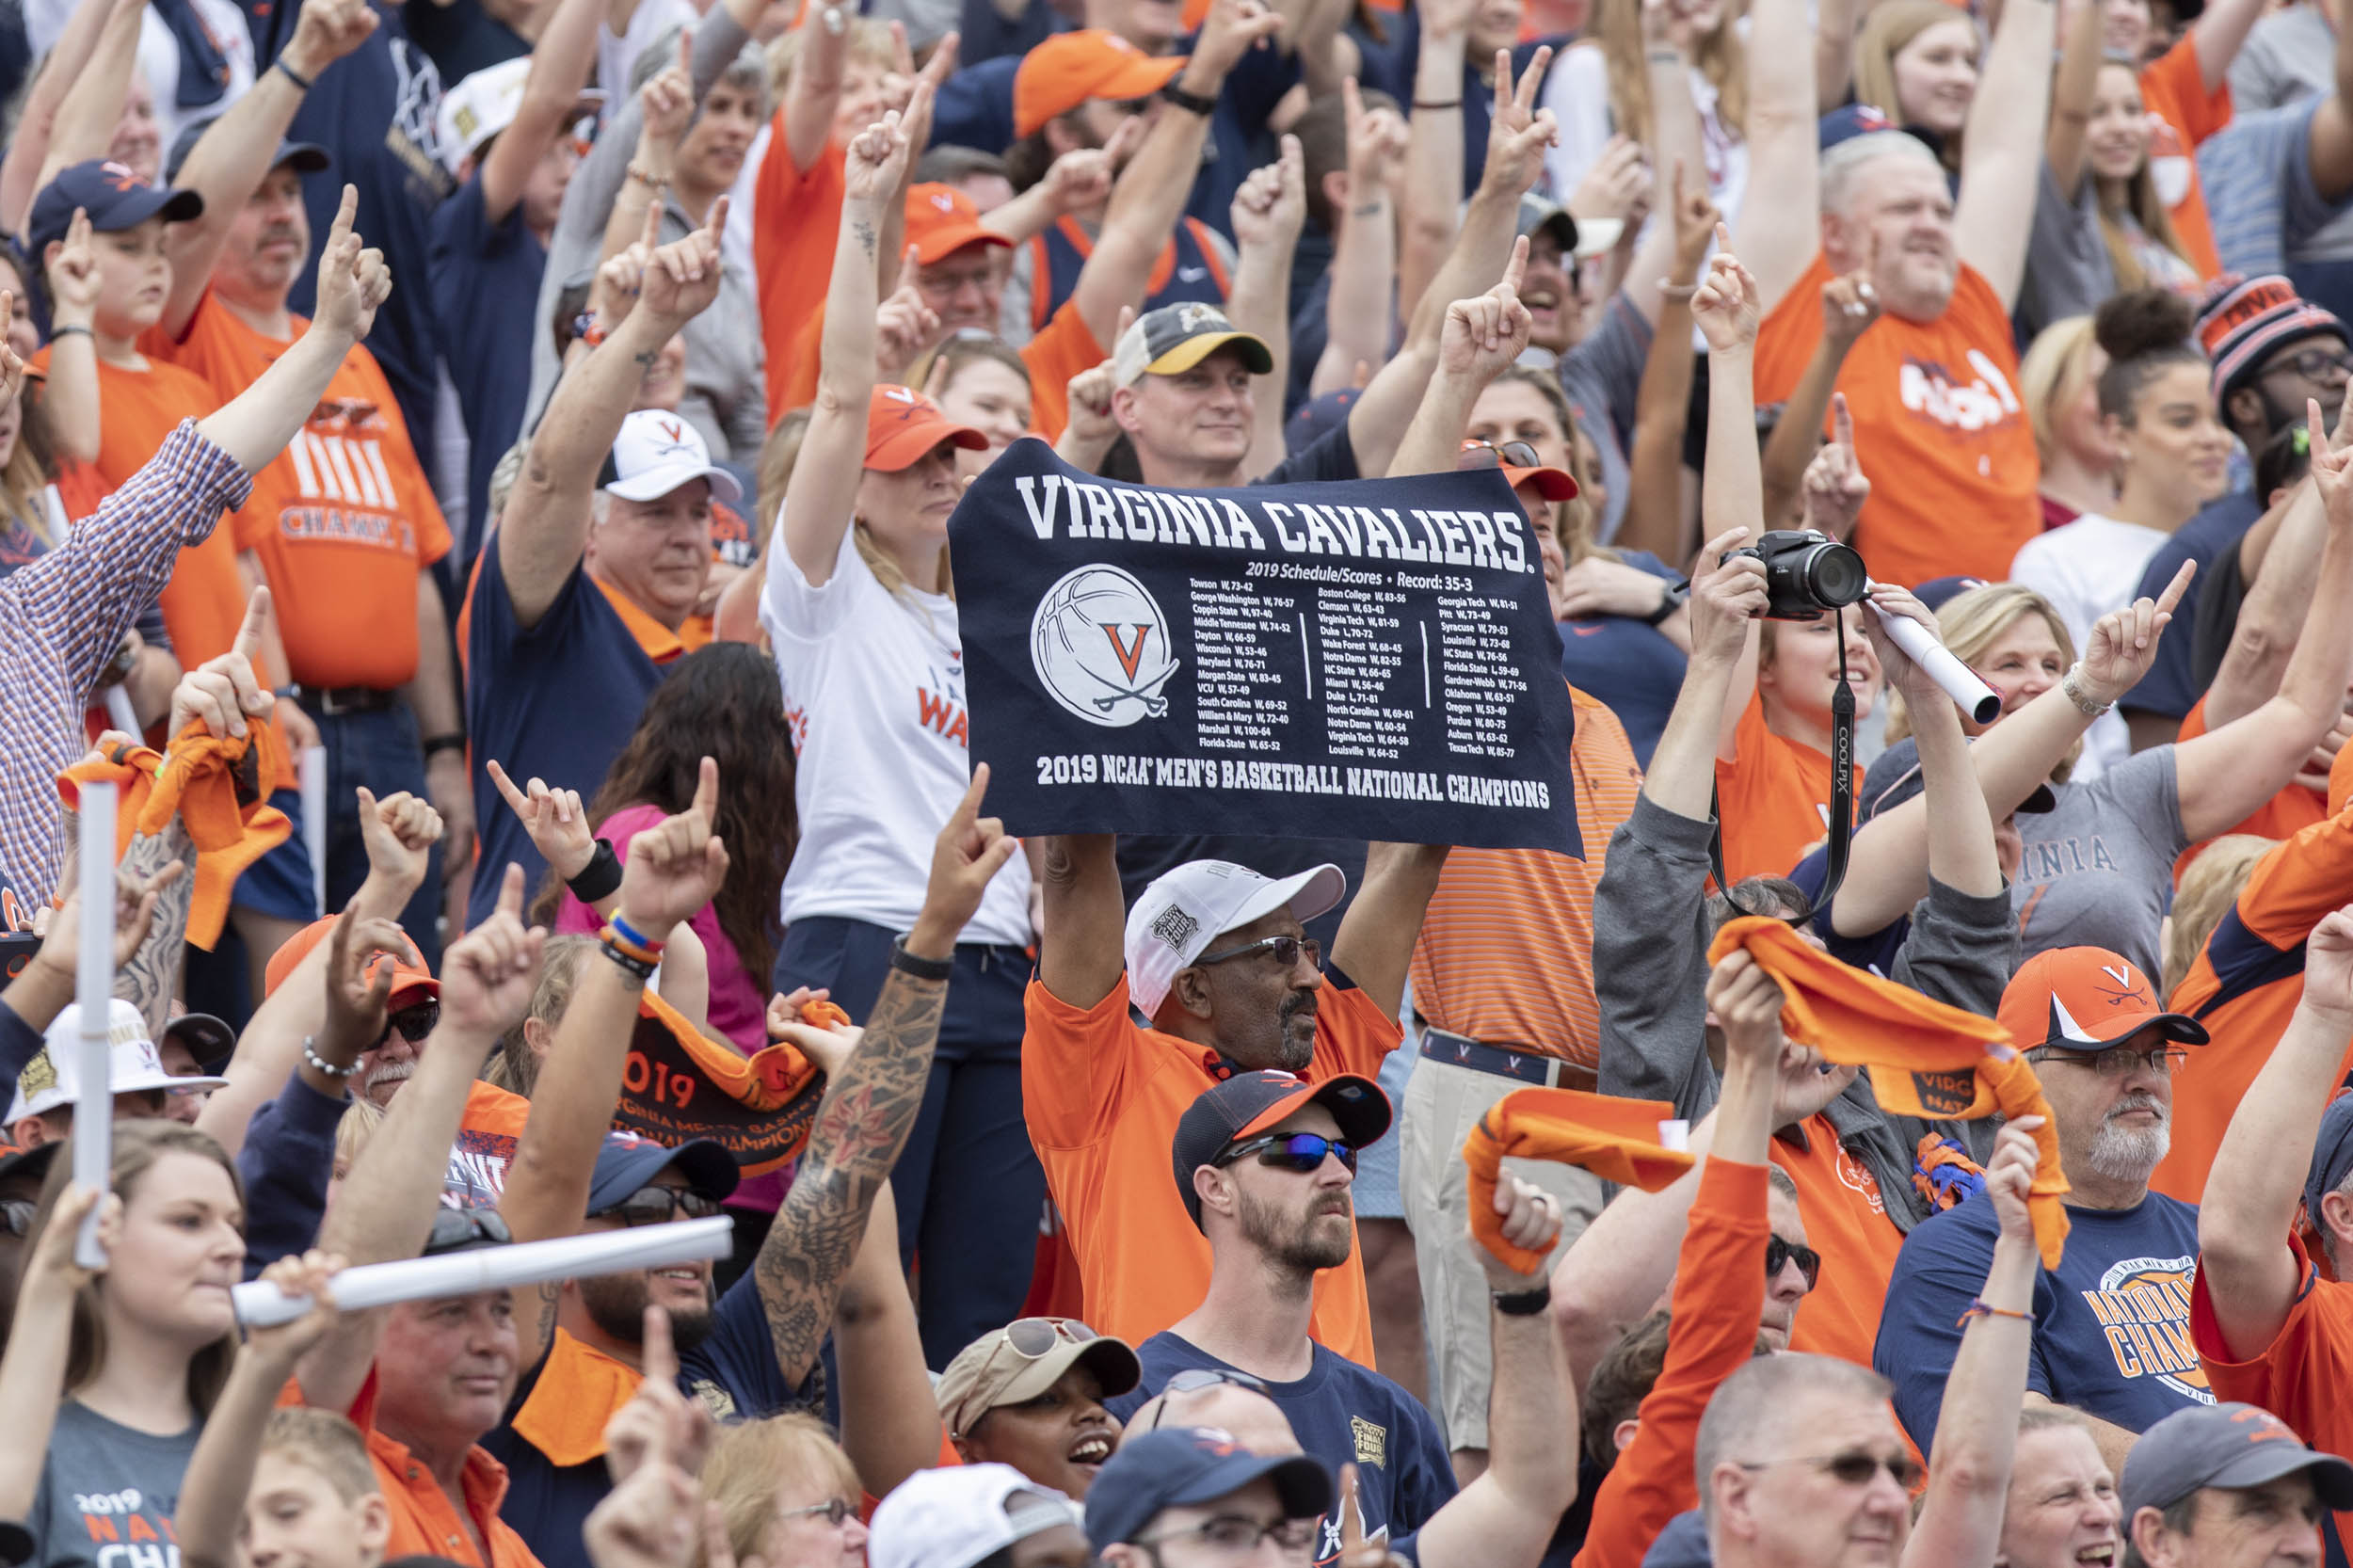 UVA fans cheering and holding signs 